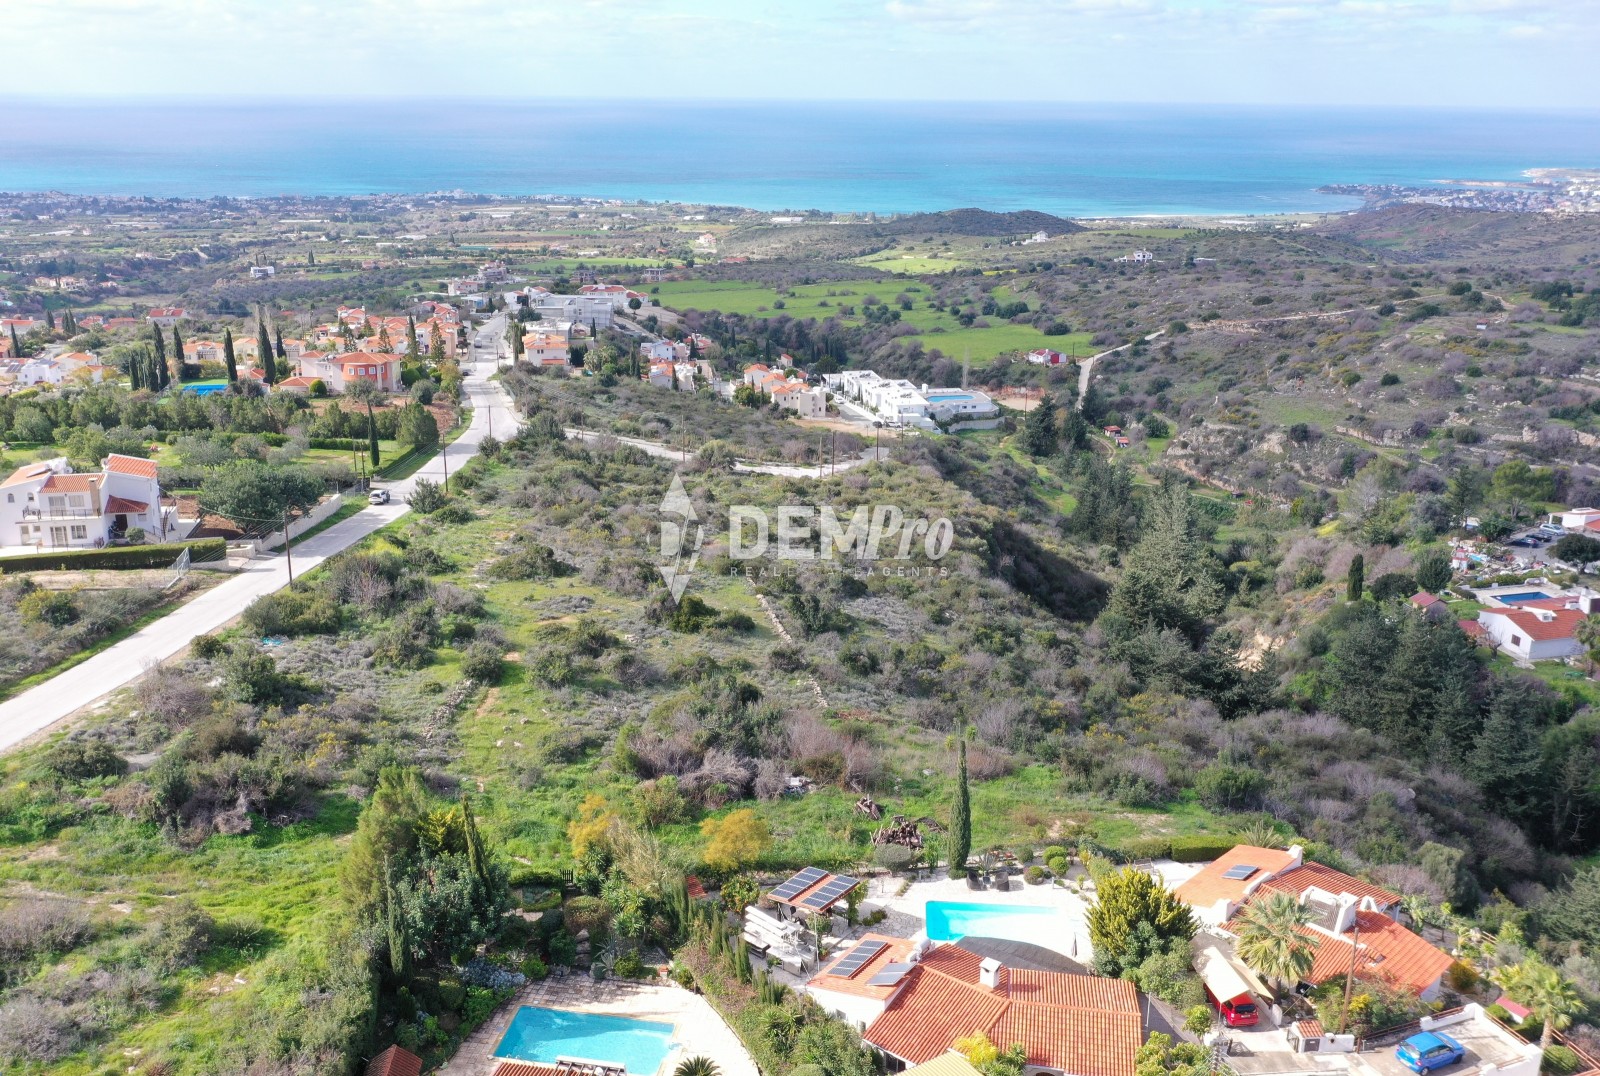 Agricultural Land For Sale in Tala, Paphos - DP3057